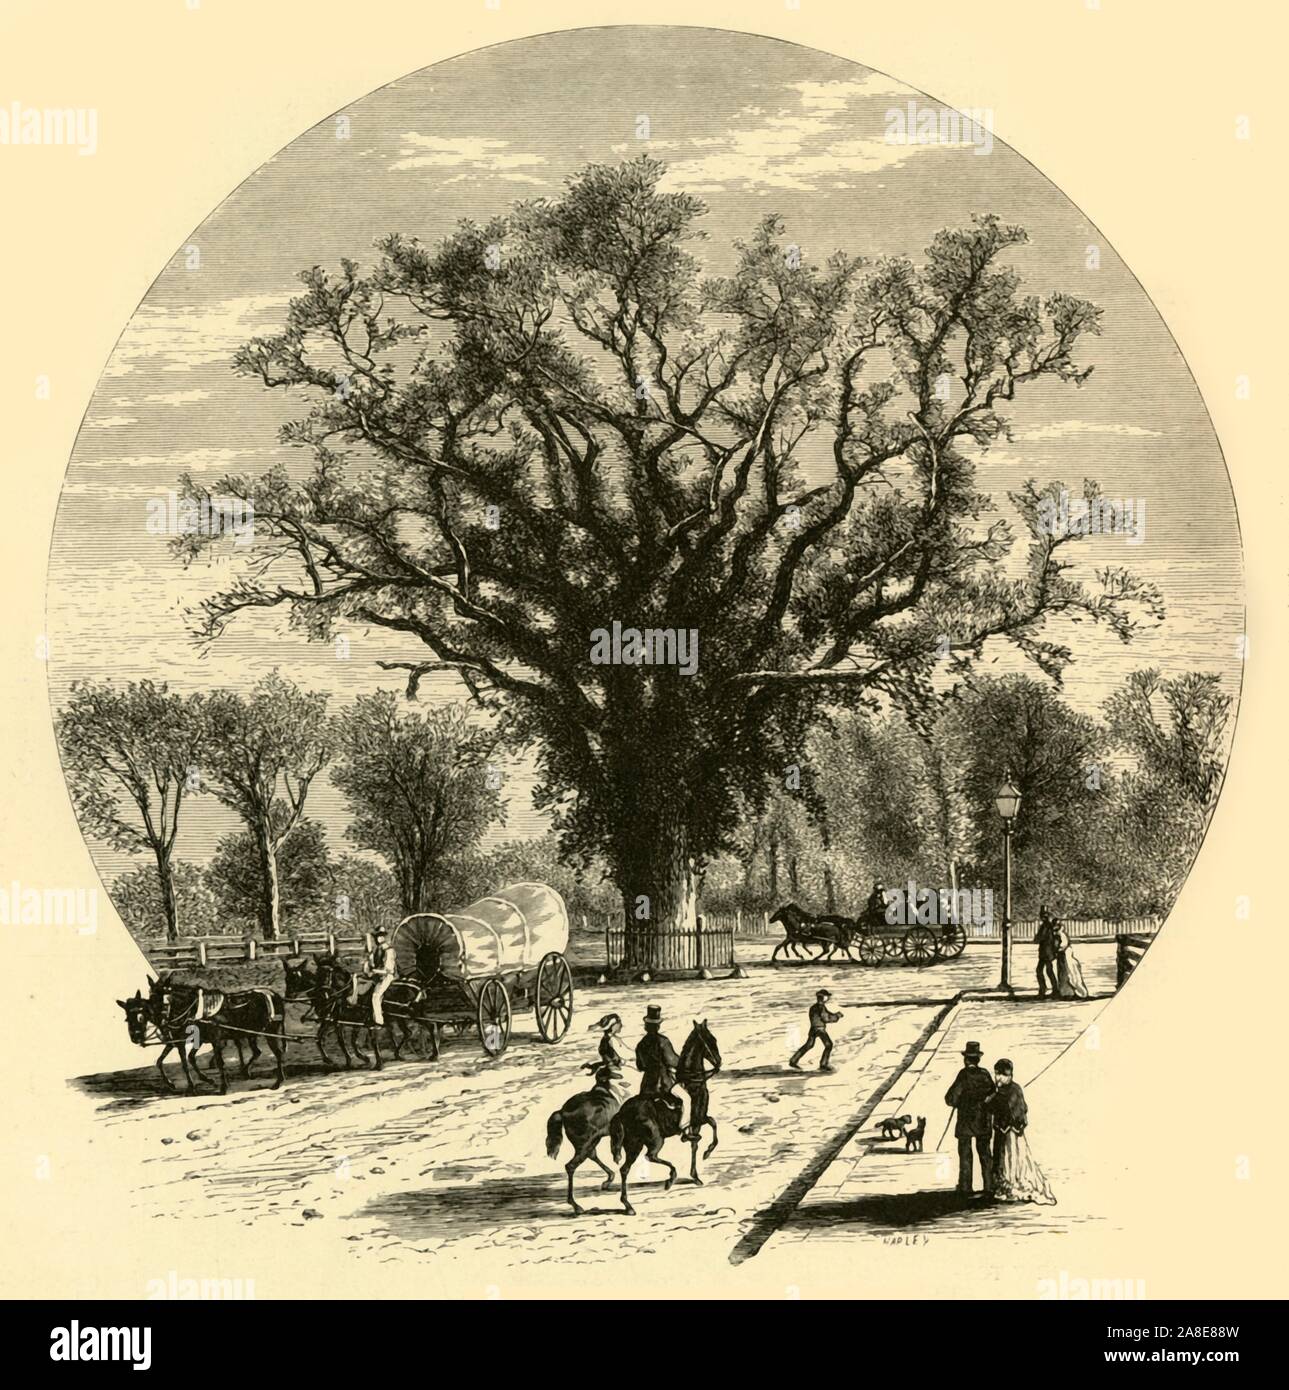 'Washington Elm, Cambridge', 1874. The Washington Elm on Cambridge Common, Cambridge, Massachusetts, USA. It was supposedly under this tree that George Washington first took command of the American Army on 3 July 1775. The tree lived for approximately 210 years and died in 1923. From &quot;Picturesque America; or, The Land We Live In, A Delineation by Pen and Pencil of the Mountains, Rivers, Lakes...with Illustrations on Steel and Wood by Eminent American Artists&quot; Vol. II, edited by William Cullen Bryant. [D. Appleton and Company, New York, 1874] Stock Photo